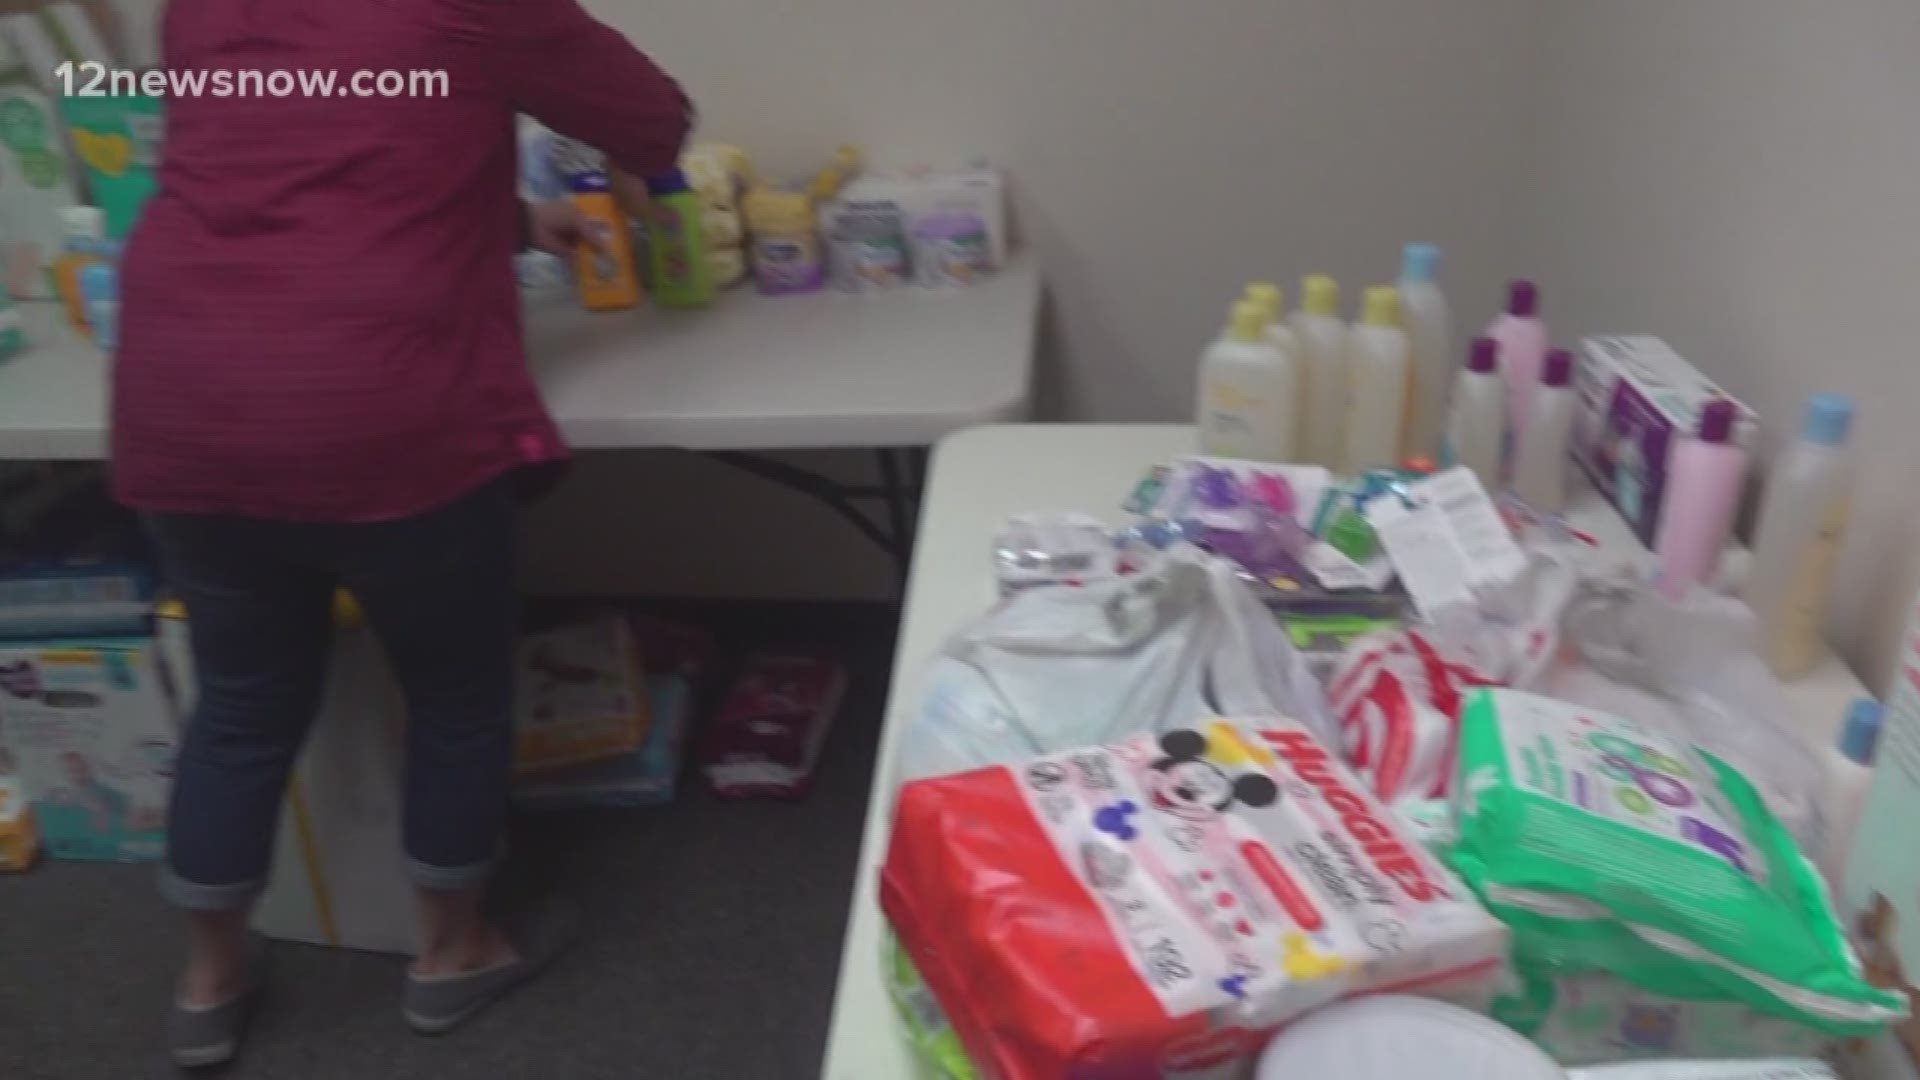 Gift cards, diapers, baby items, car seats and body care items are all needed.